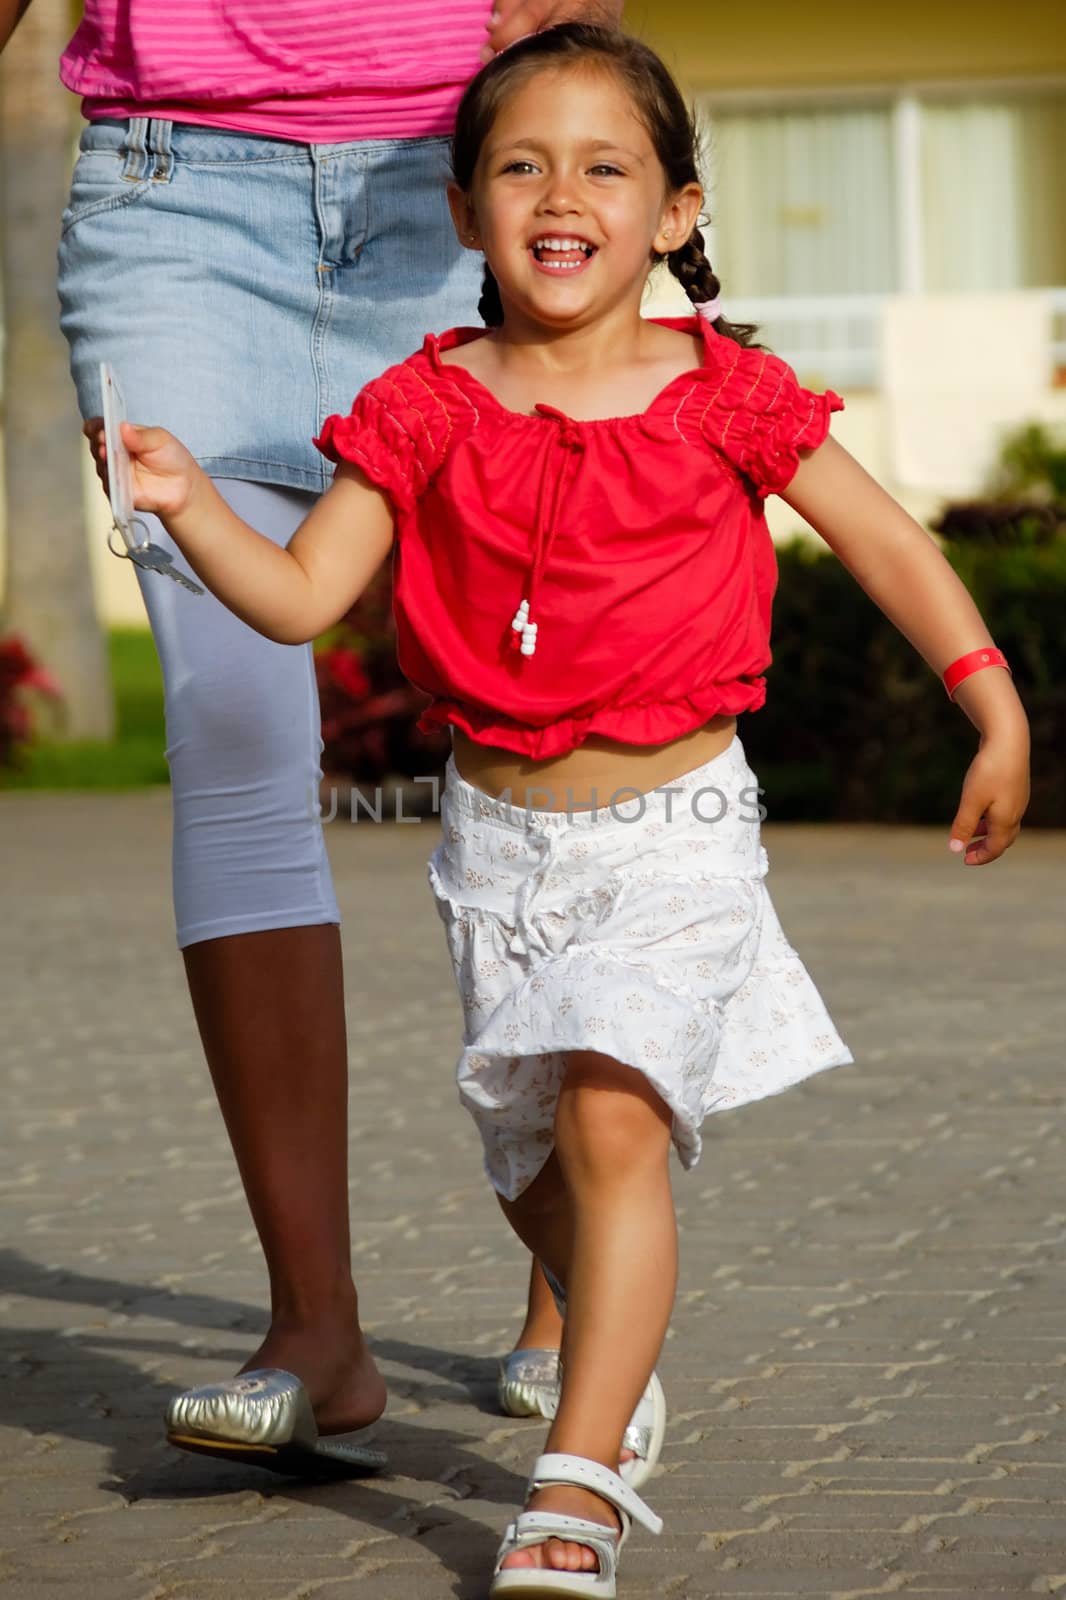 A happy child is running while holding a hotel key in her hand